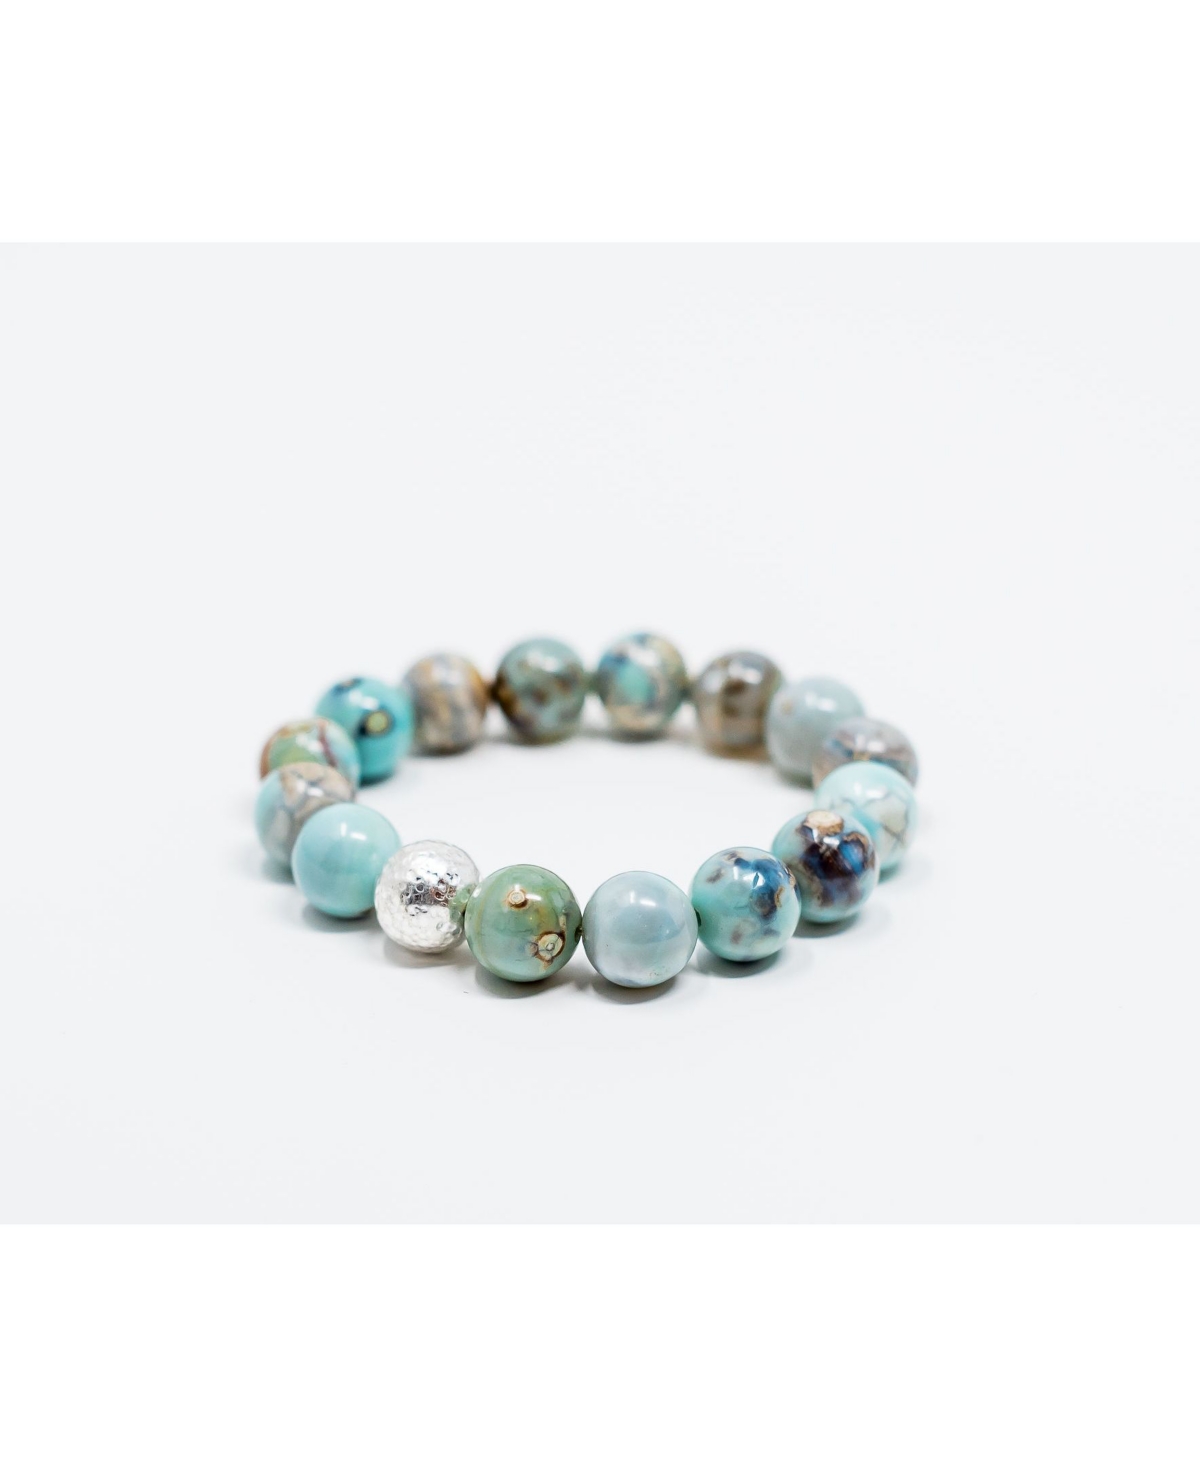 KATIE'S COTTAGE BARN KATIE'S COTTAGE BARN AQUA TERRA AGATE GEMSTONE WITH HAMMERED SILVER FOCAL BEAD BRACELET